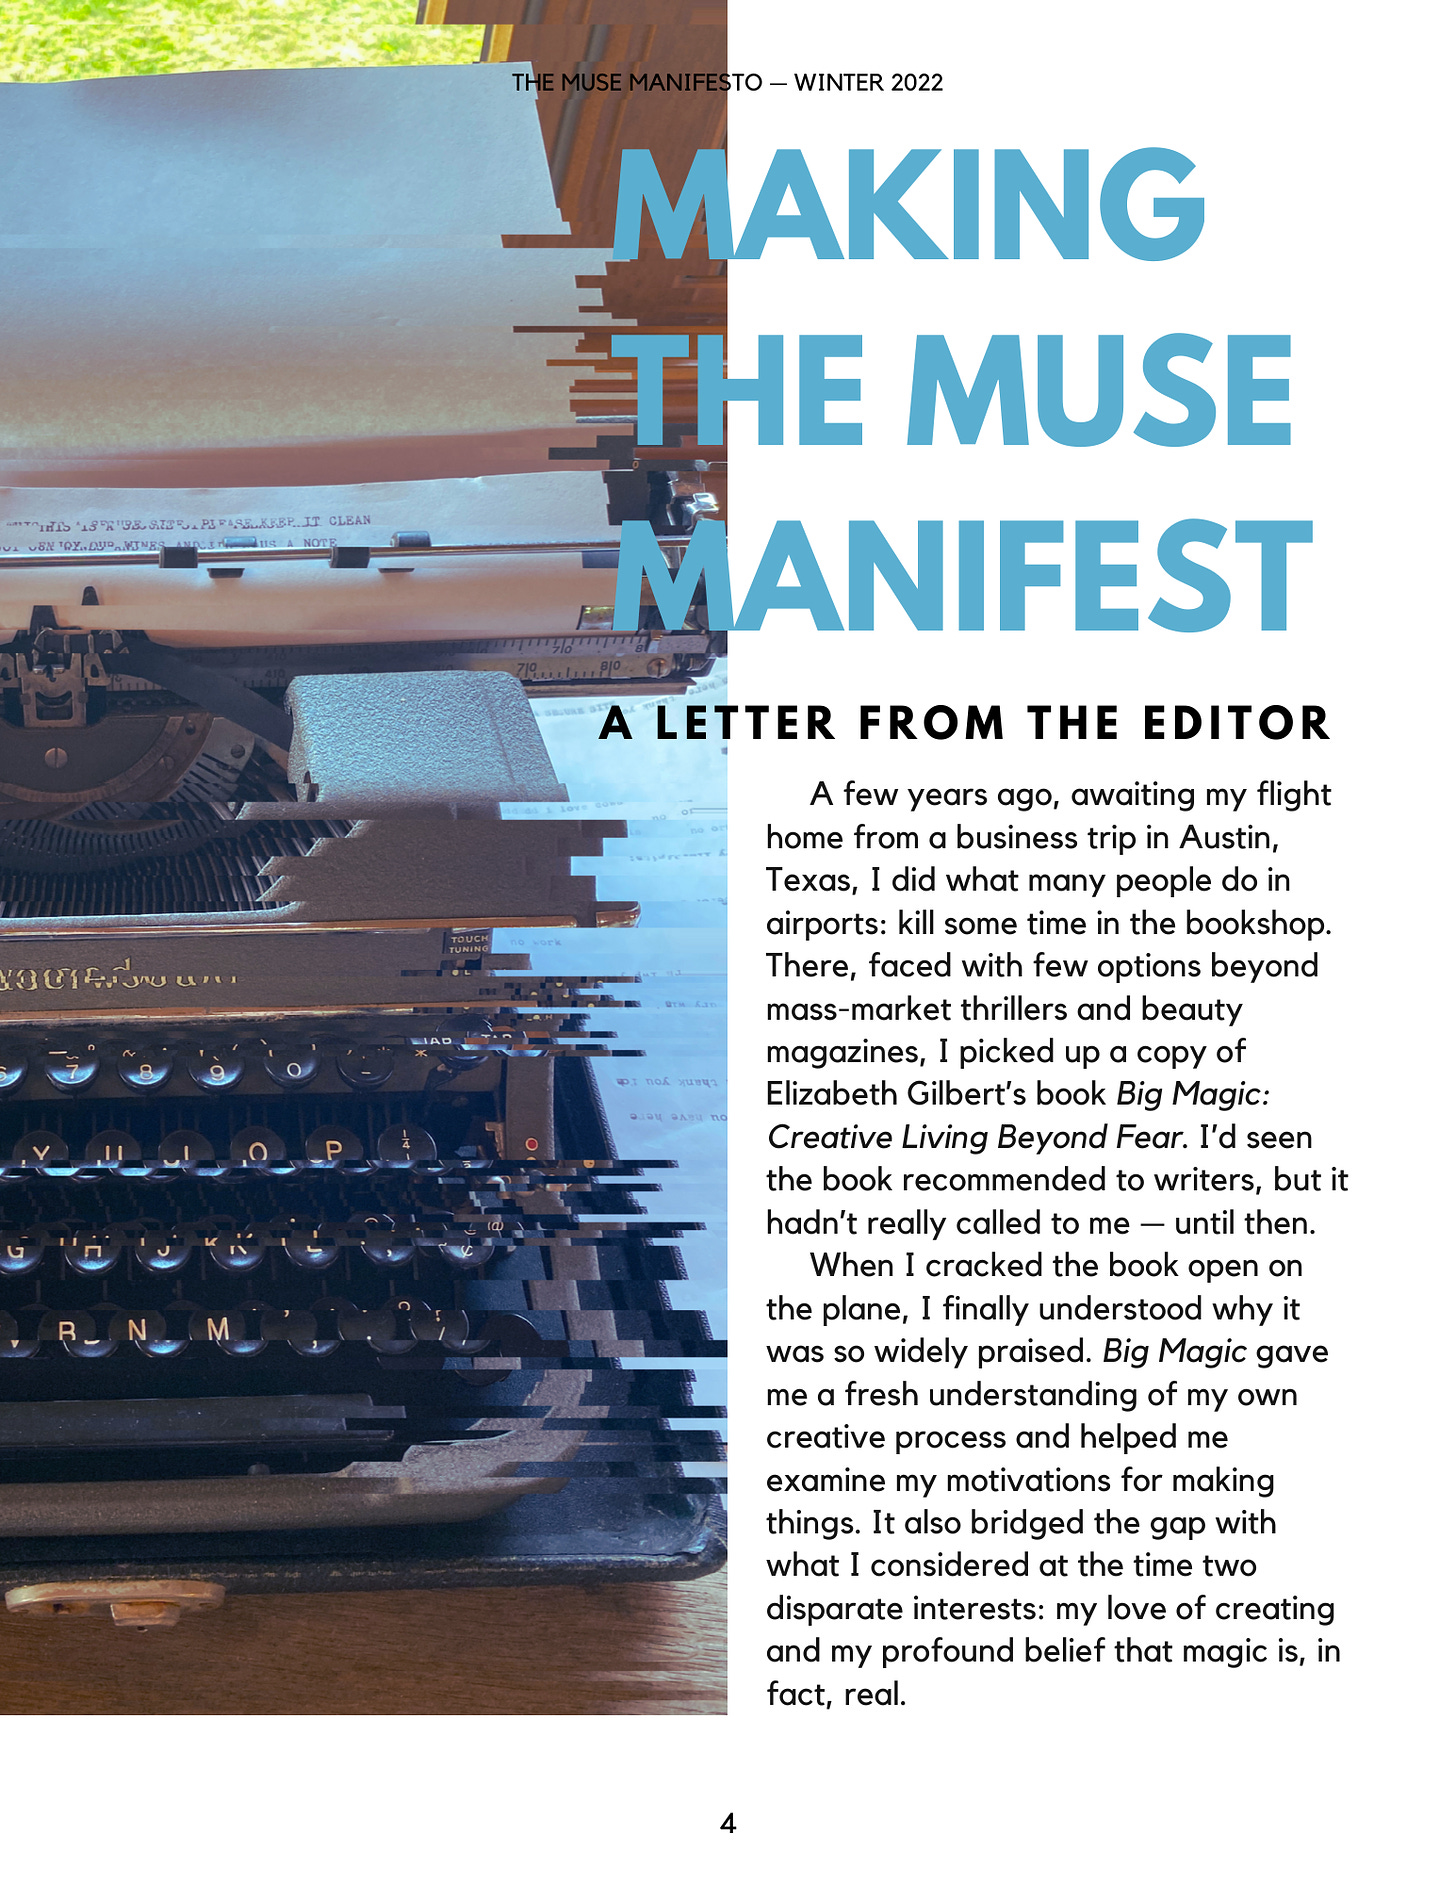 A page of the zine "A letter from the editor" with a glitchy photo of a typewriter